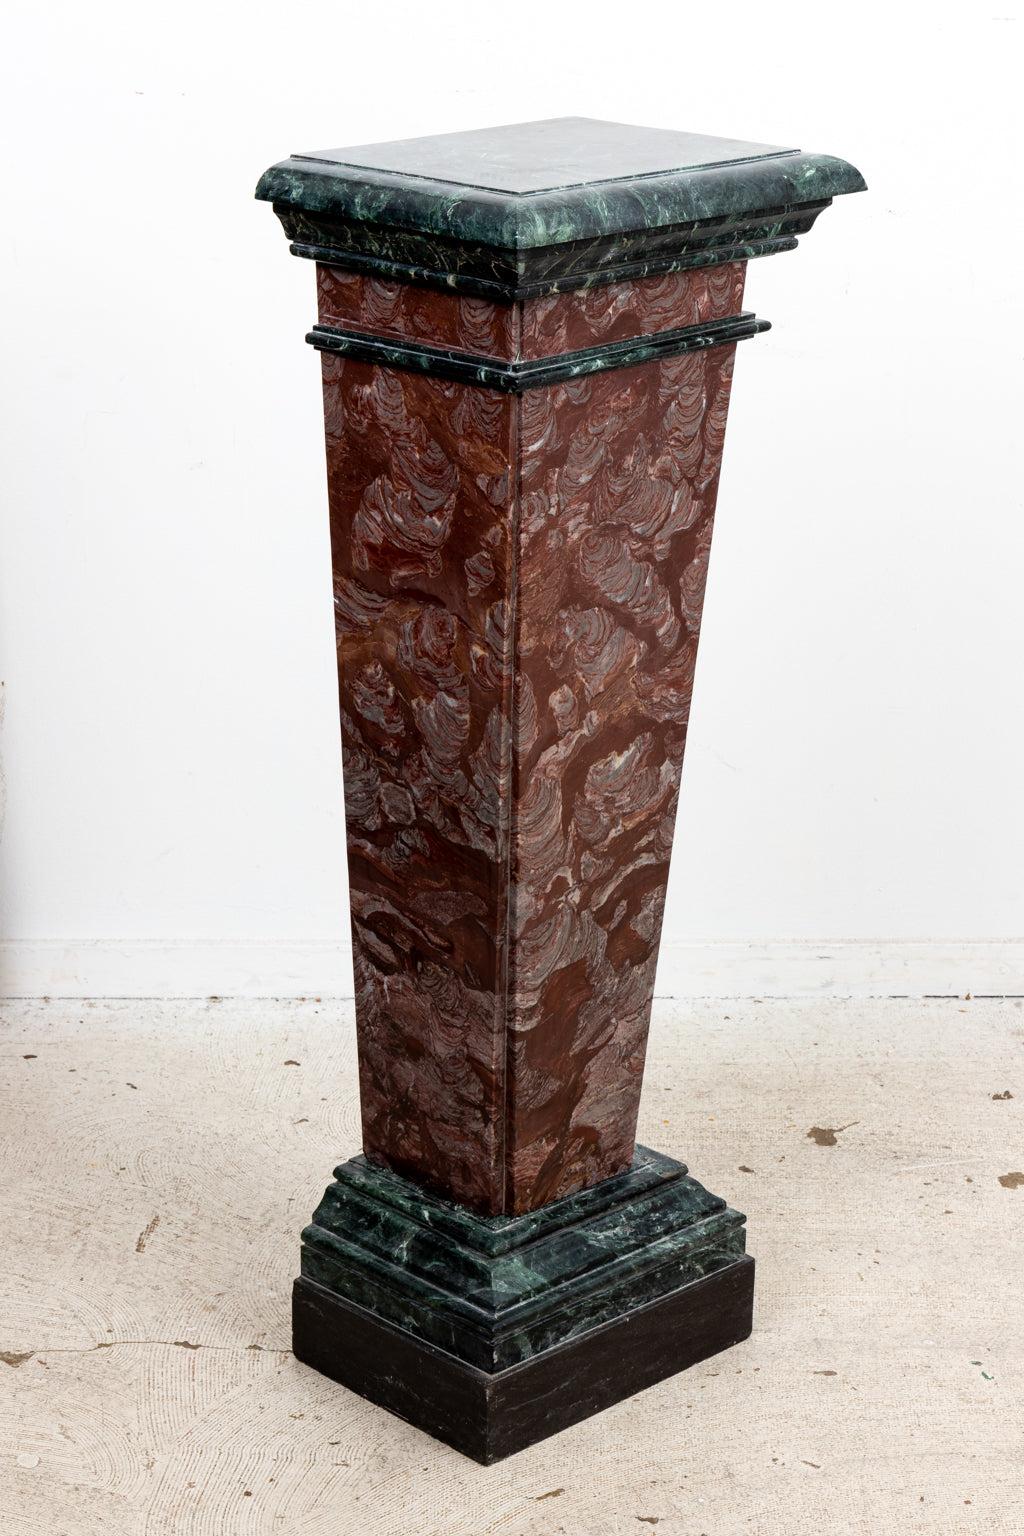 Pair of 19th century carved brown vein marble pedestals in the Neoclassical style. The pedestals feature duel colored marble and a tapered column base. Origin unknown. Please note of wear consistent with age.